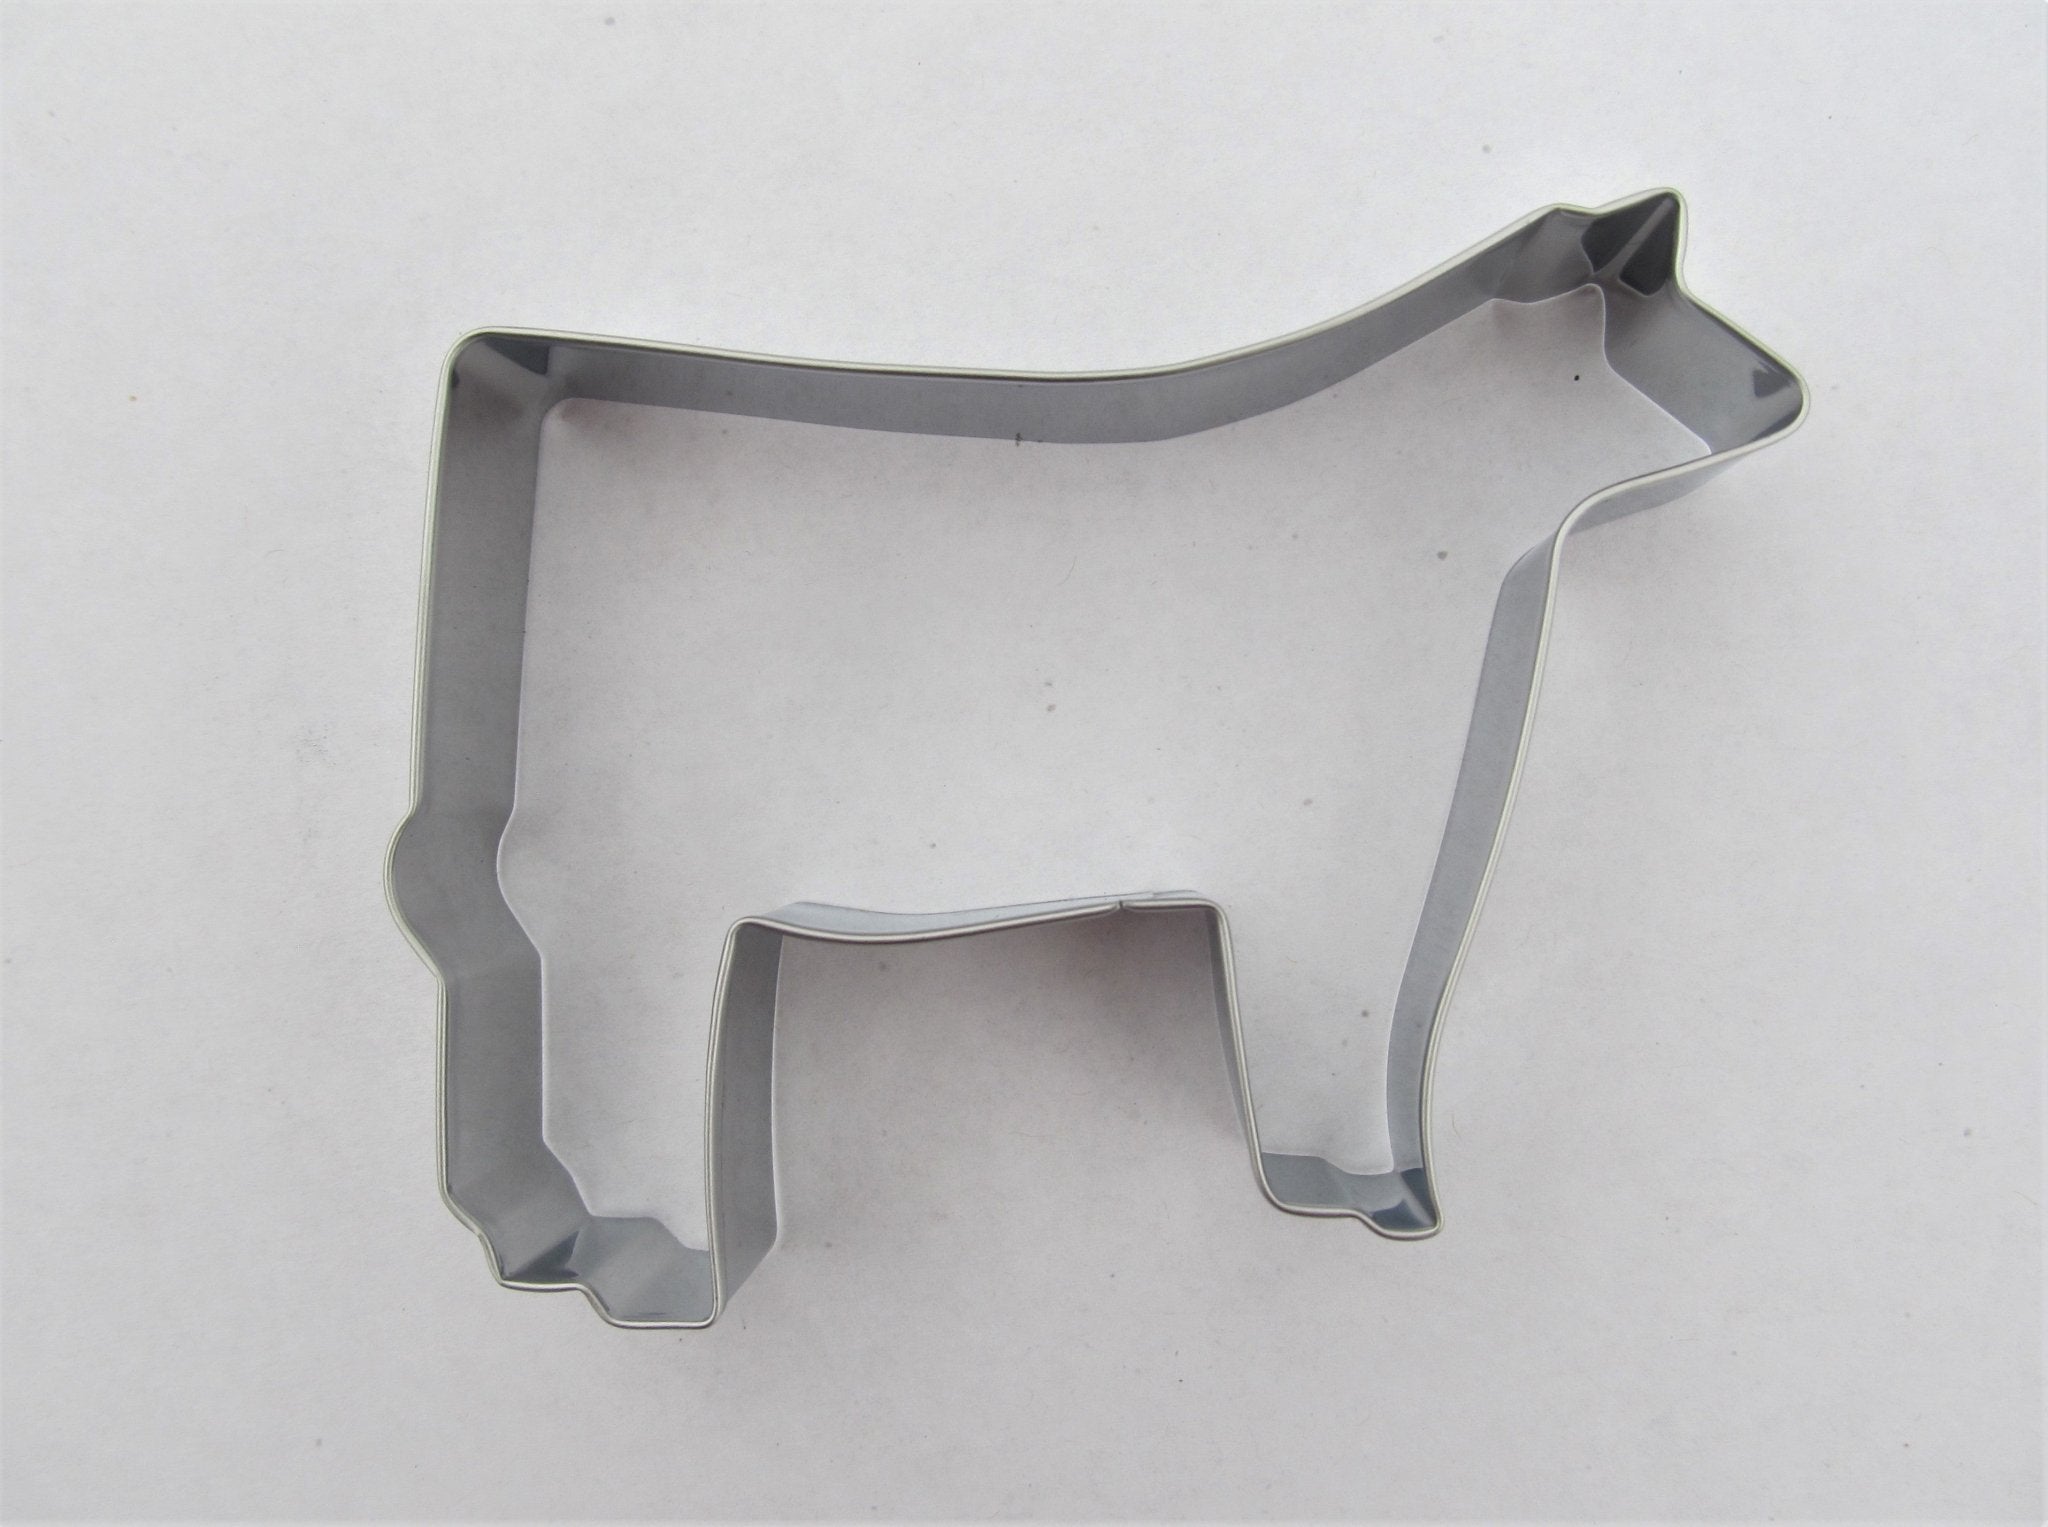 Show Steer Candy Mold – The Branded Barn